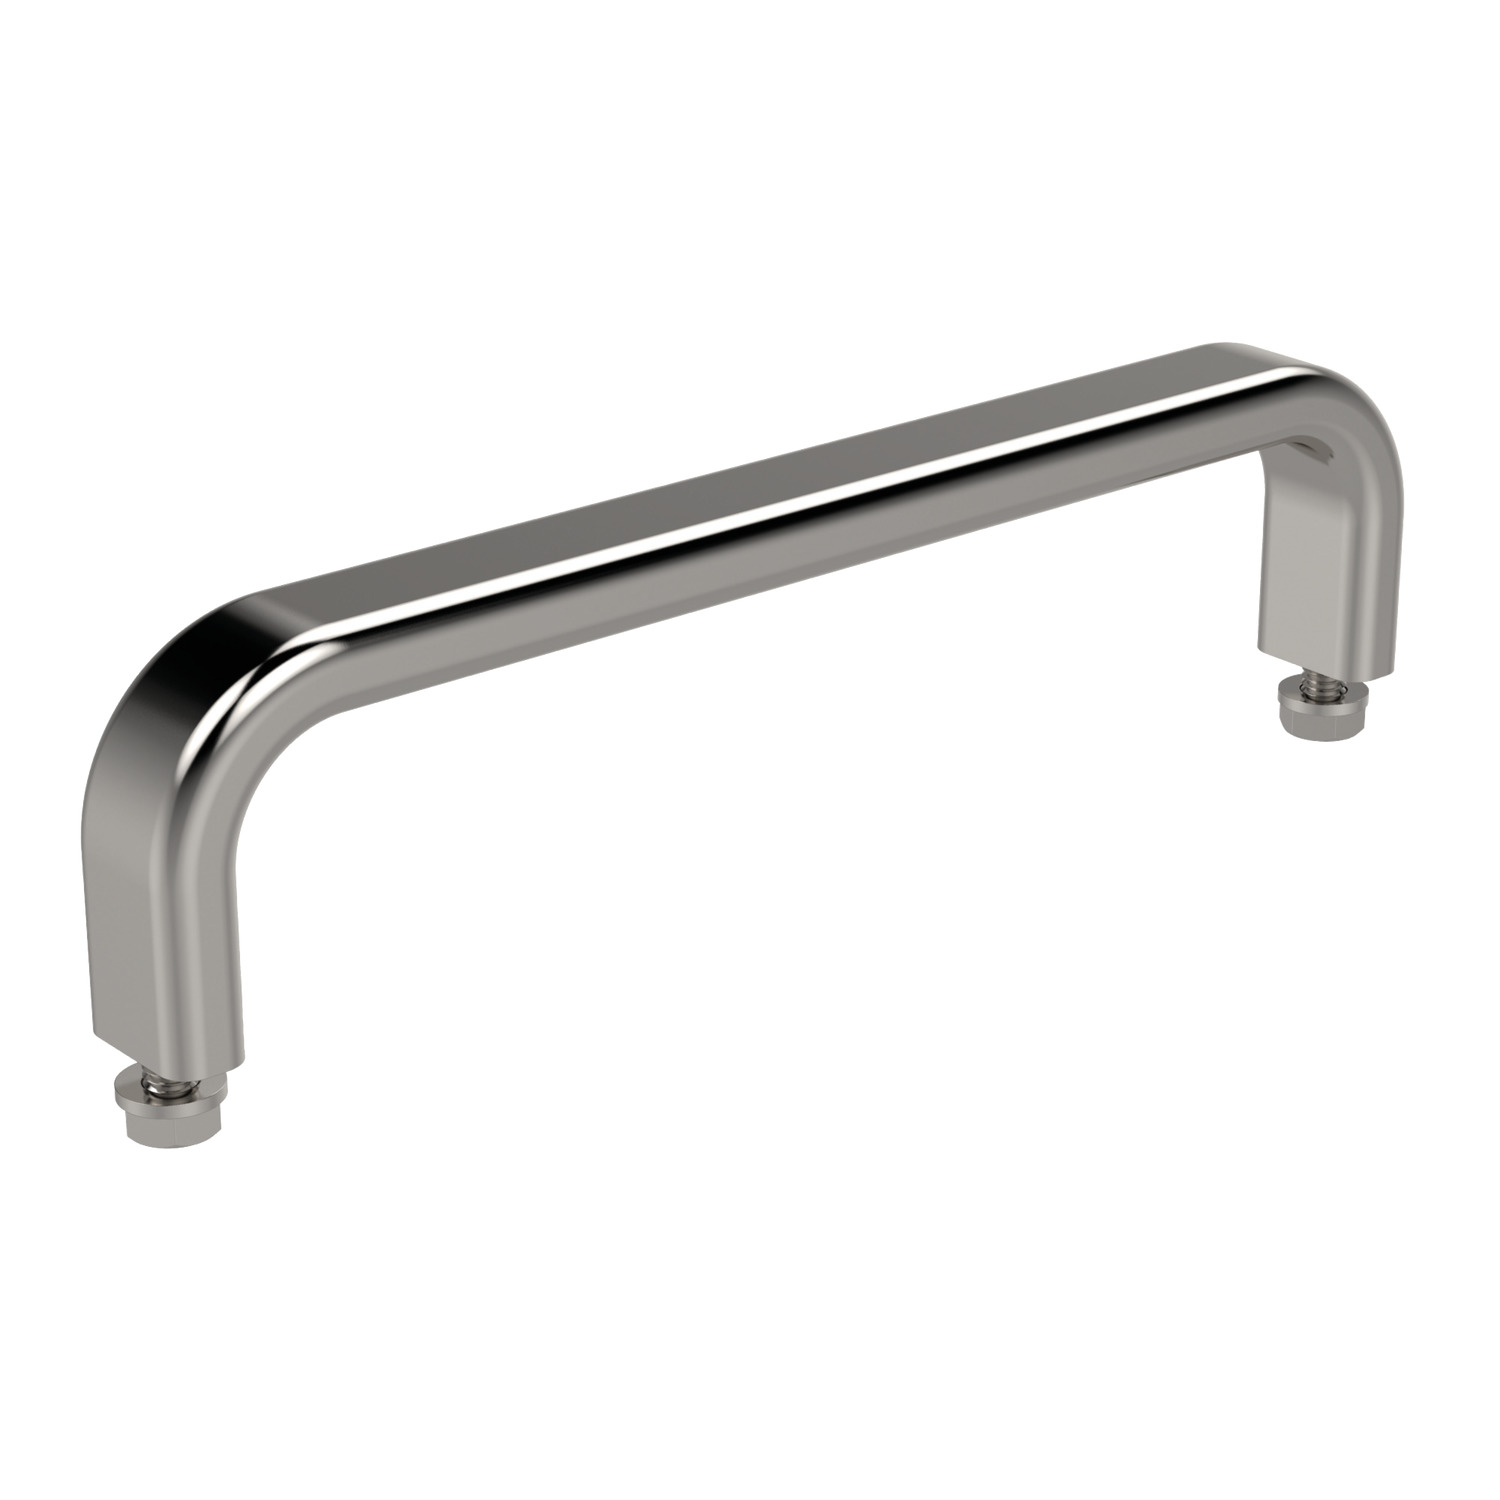 78920 Pull Handles - Oval Type